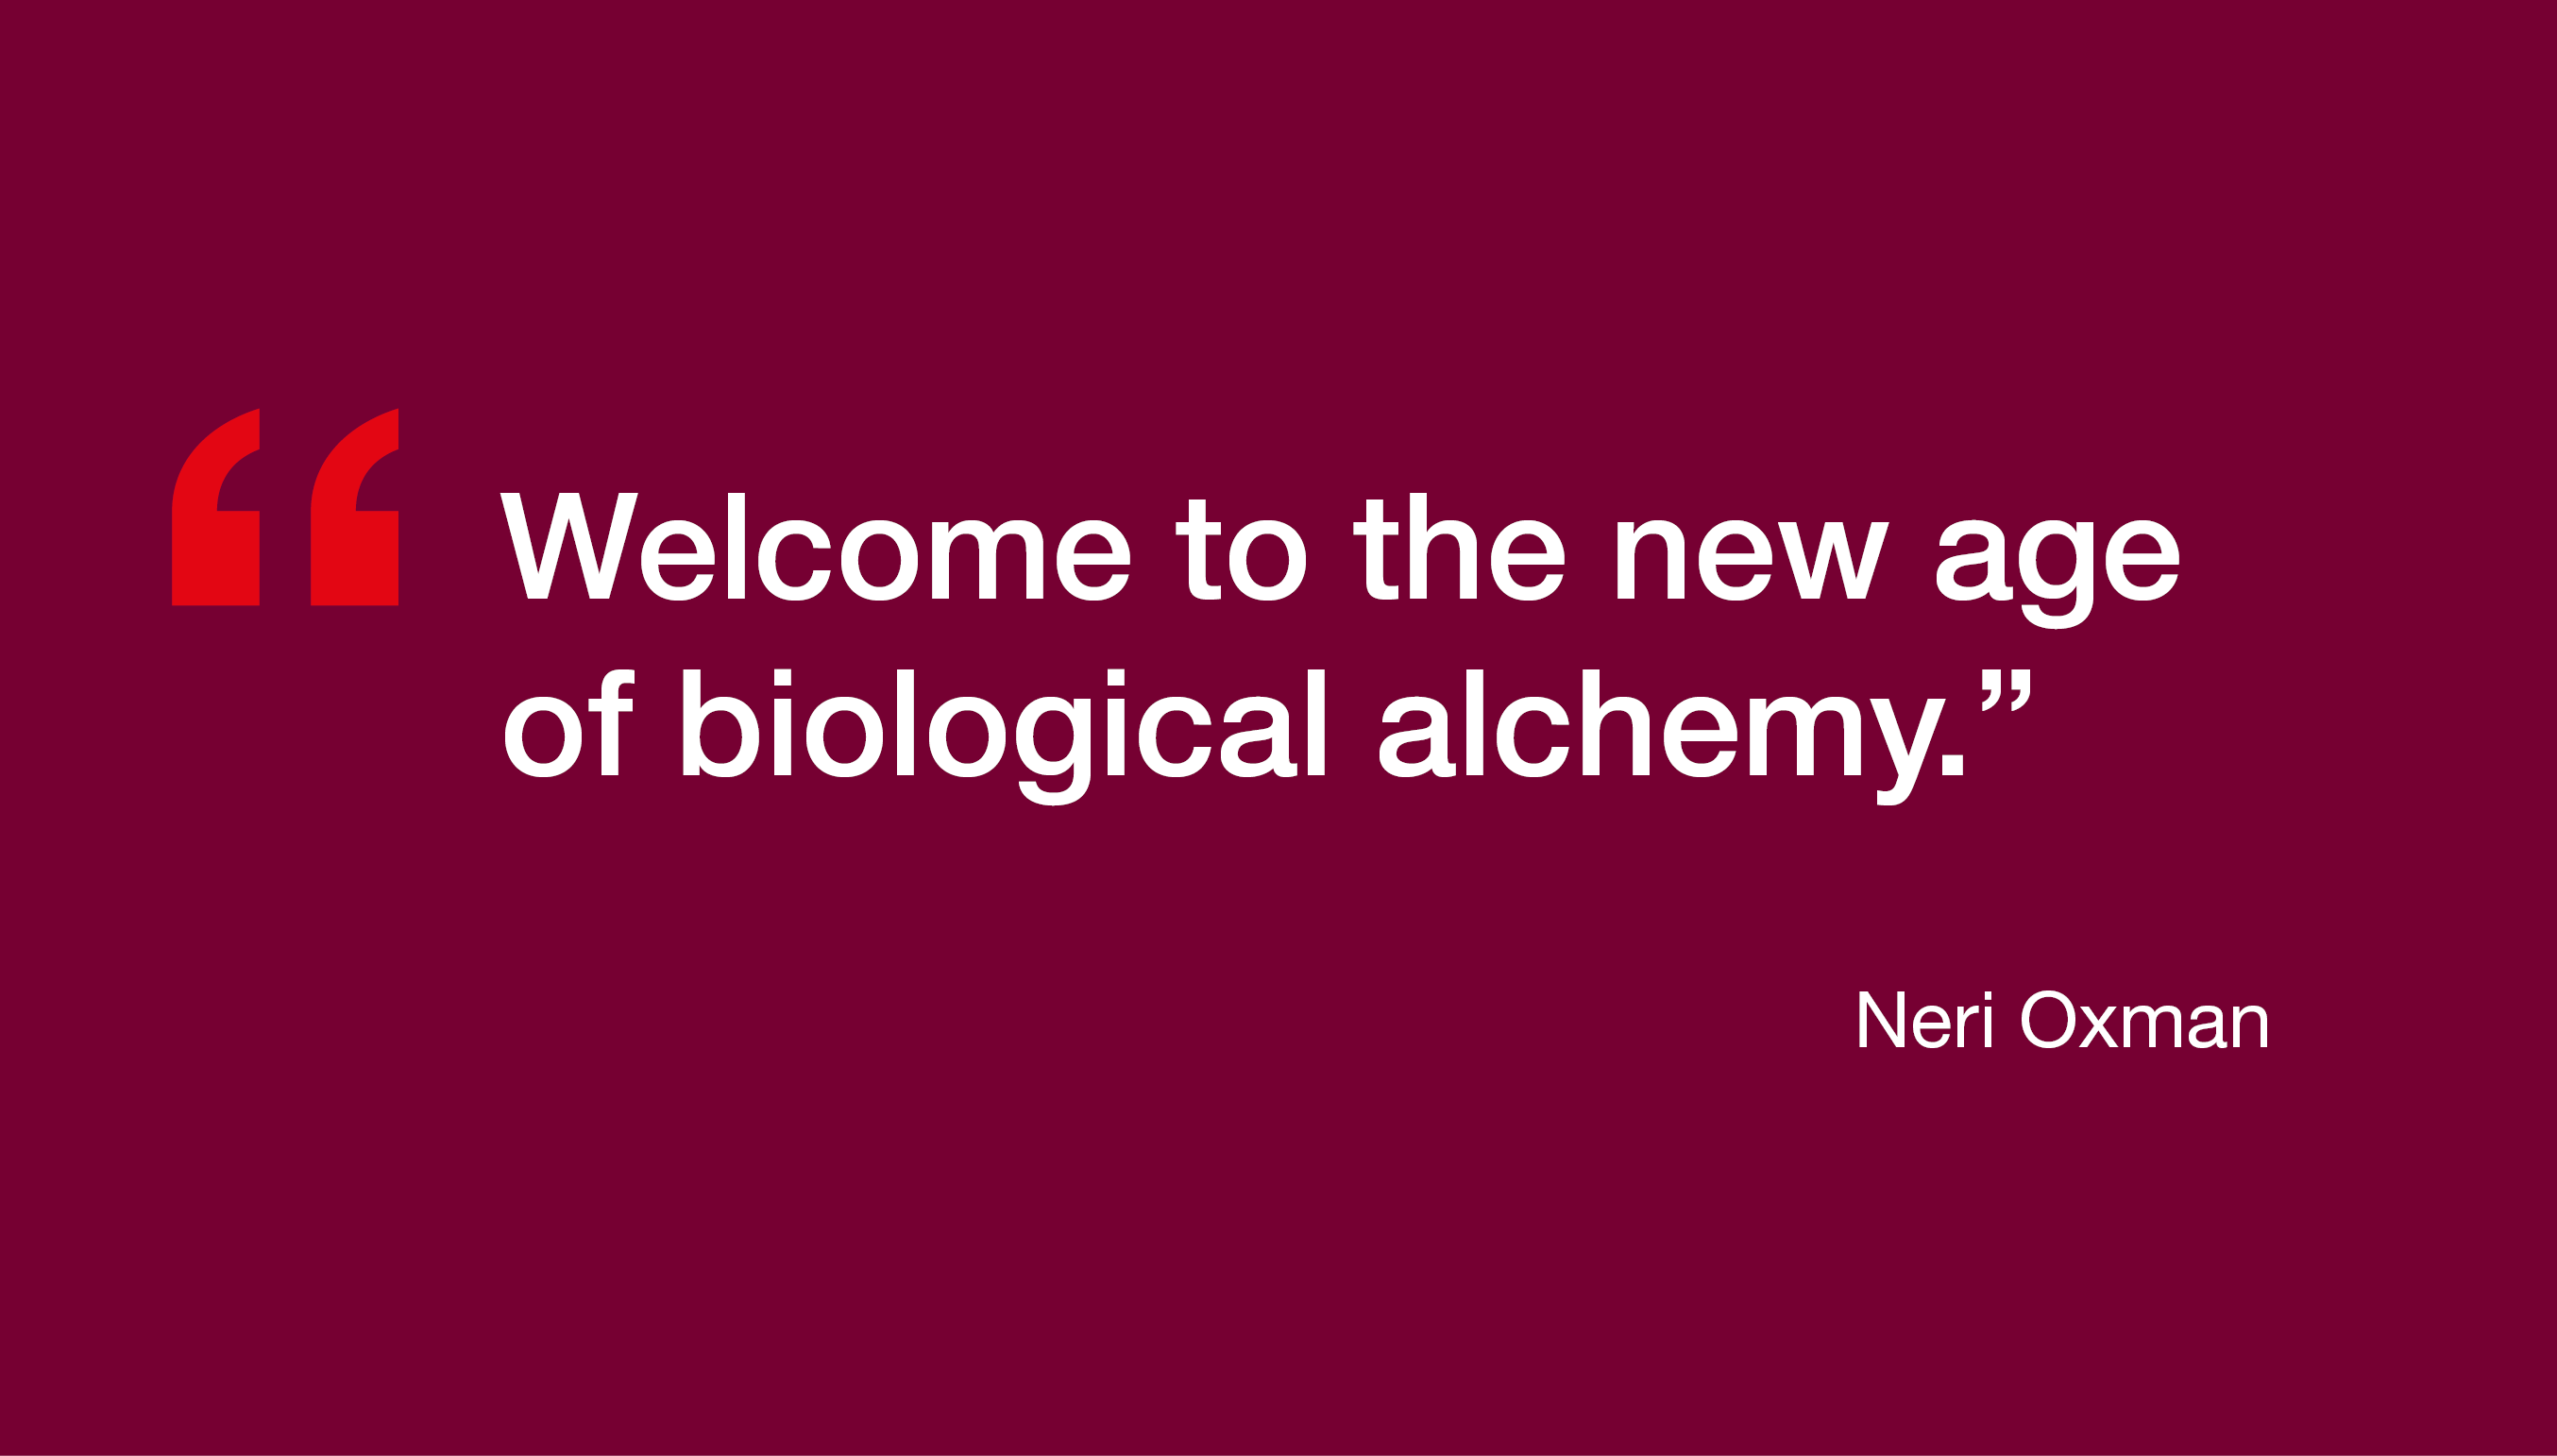 "Welcome to the new age of biological alchemy." Neri Oxman